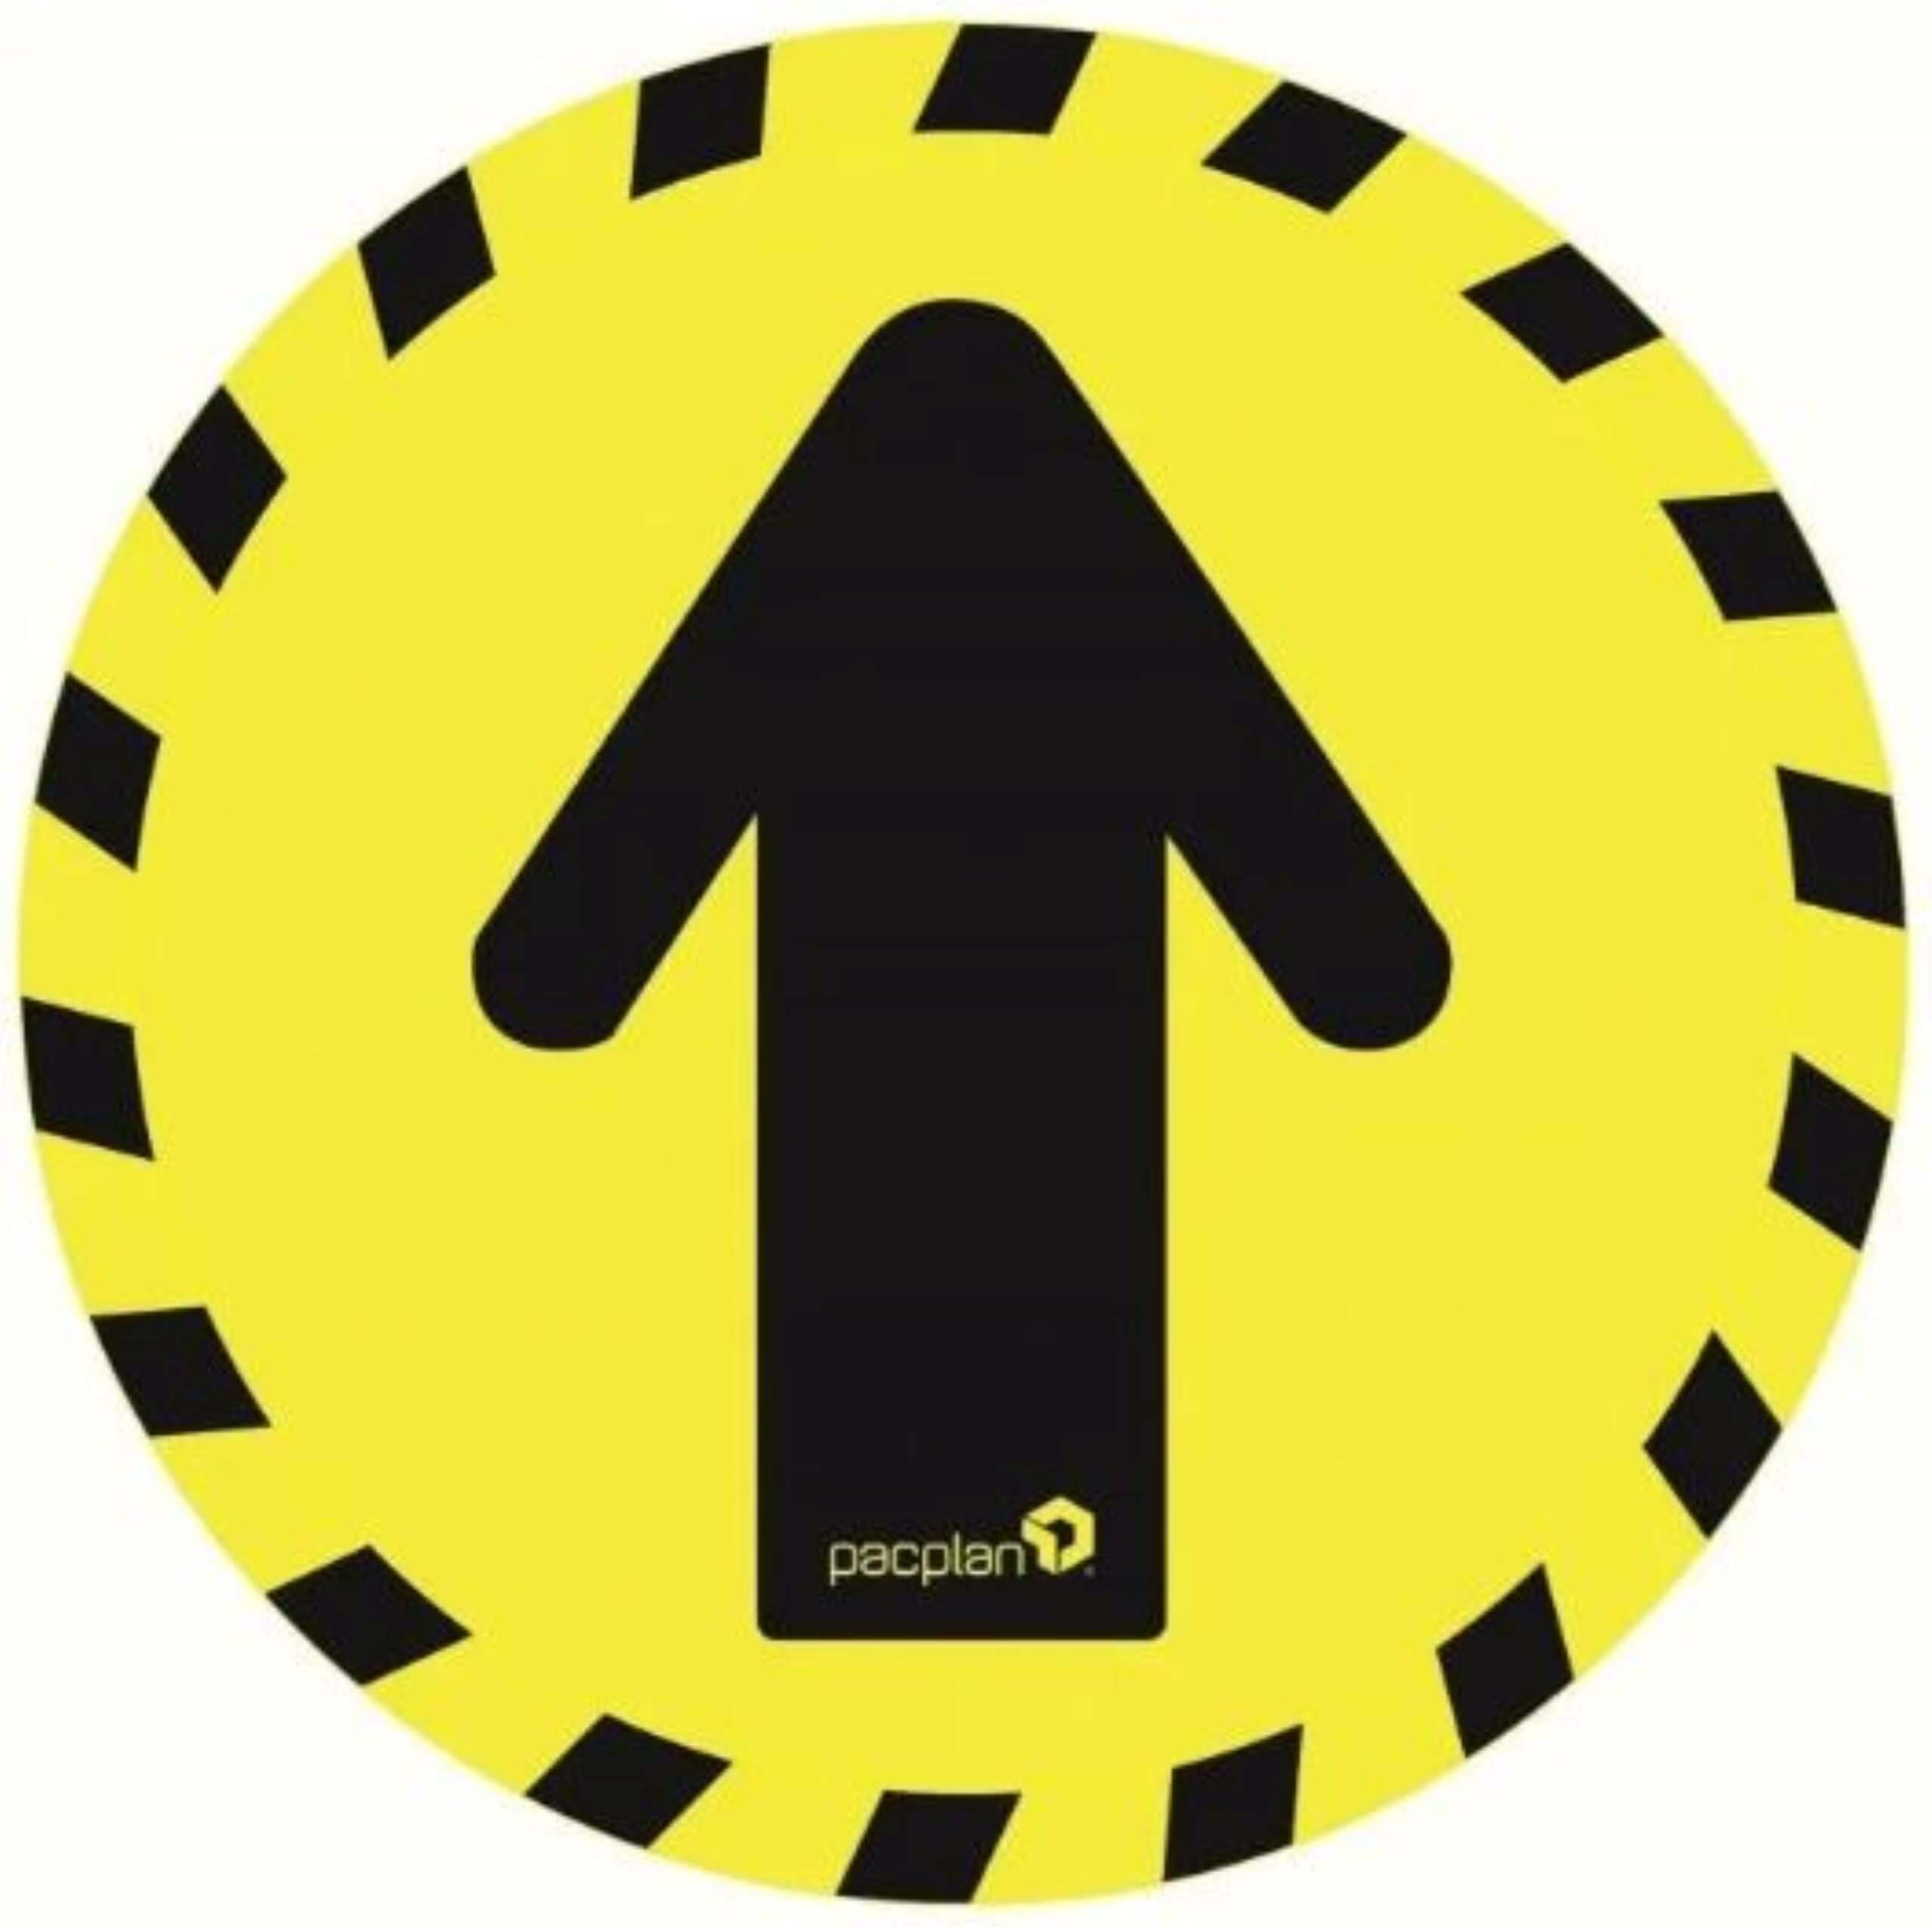 An image showing one of our Safety Floor Stickers.